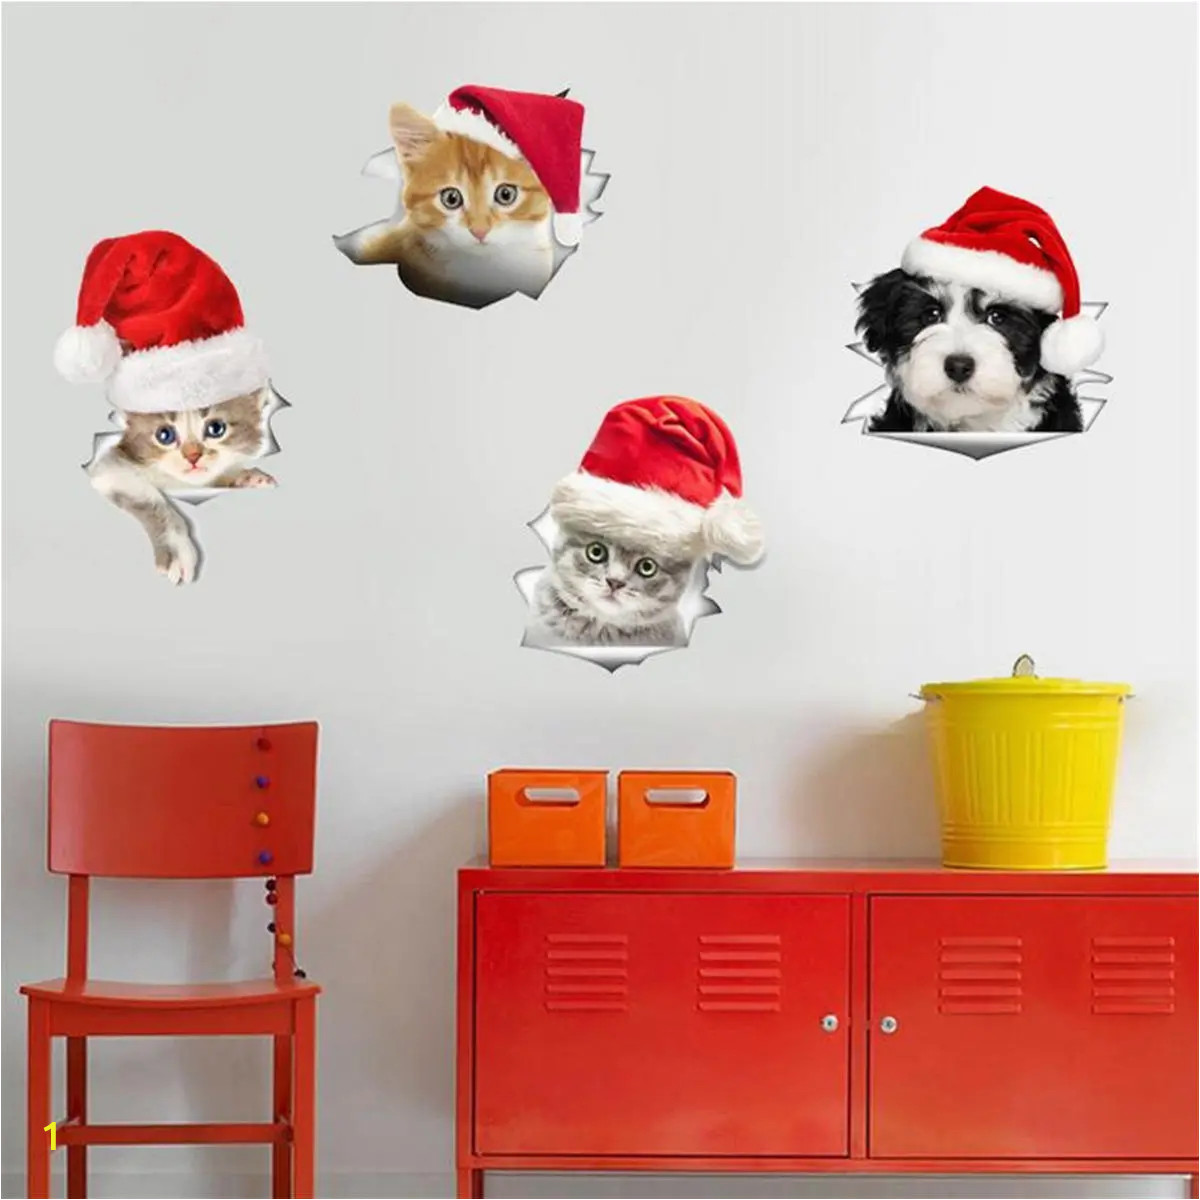 Large Christmas Wall Murals Christmas Pvc Mural Wall Fridge Stickers toilet Stool Poster Decals Home Decor Sticker